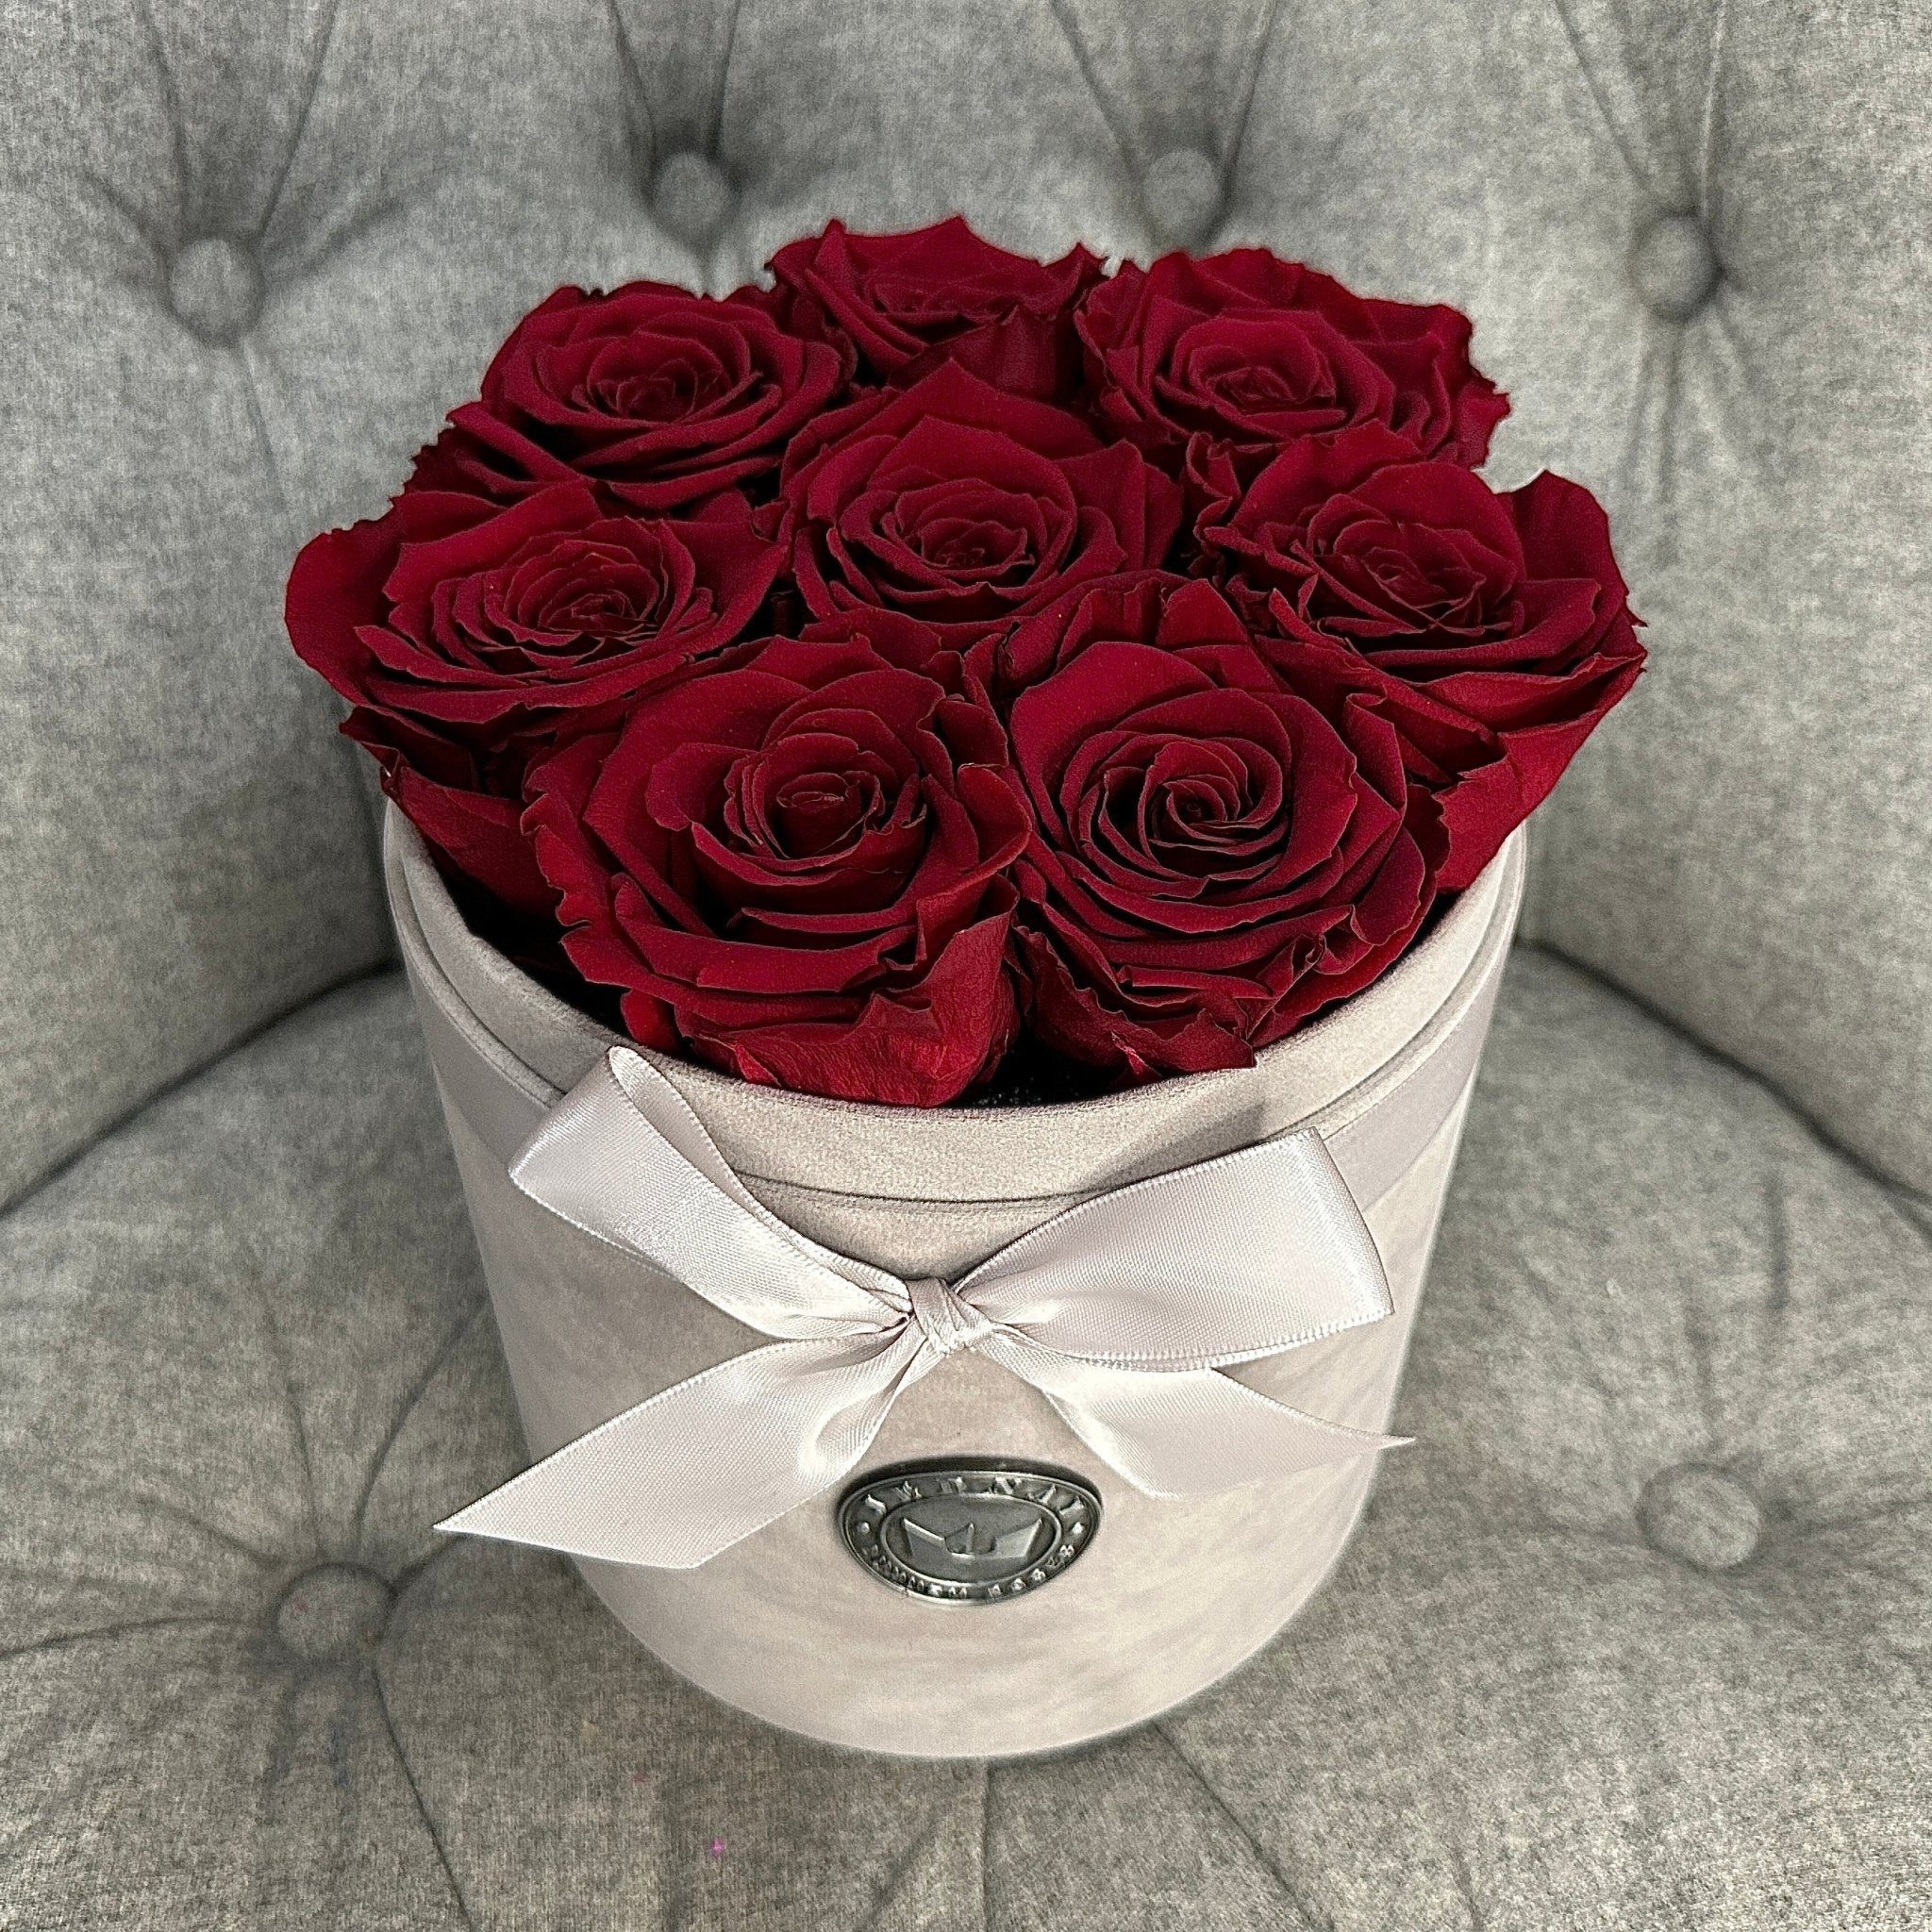 Medium Grey Suede Forever Rose Box - Red Red Wine Eternal Roses - Jednay Roses